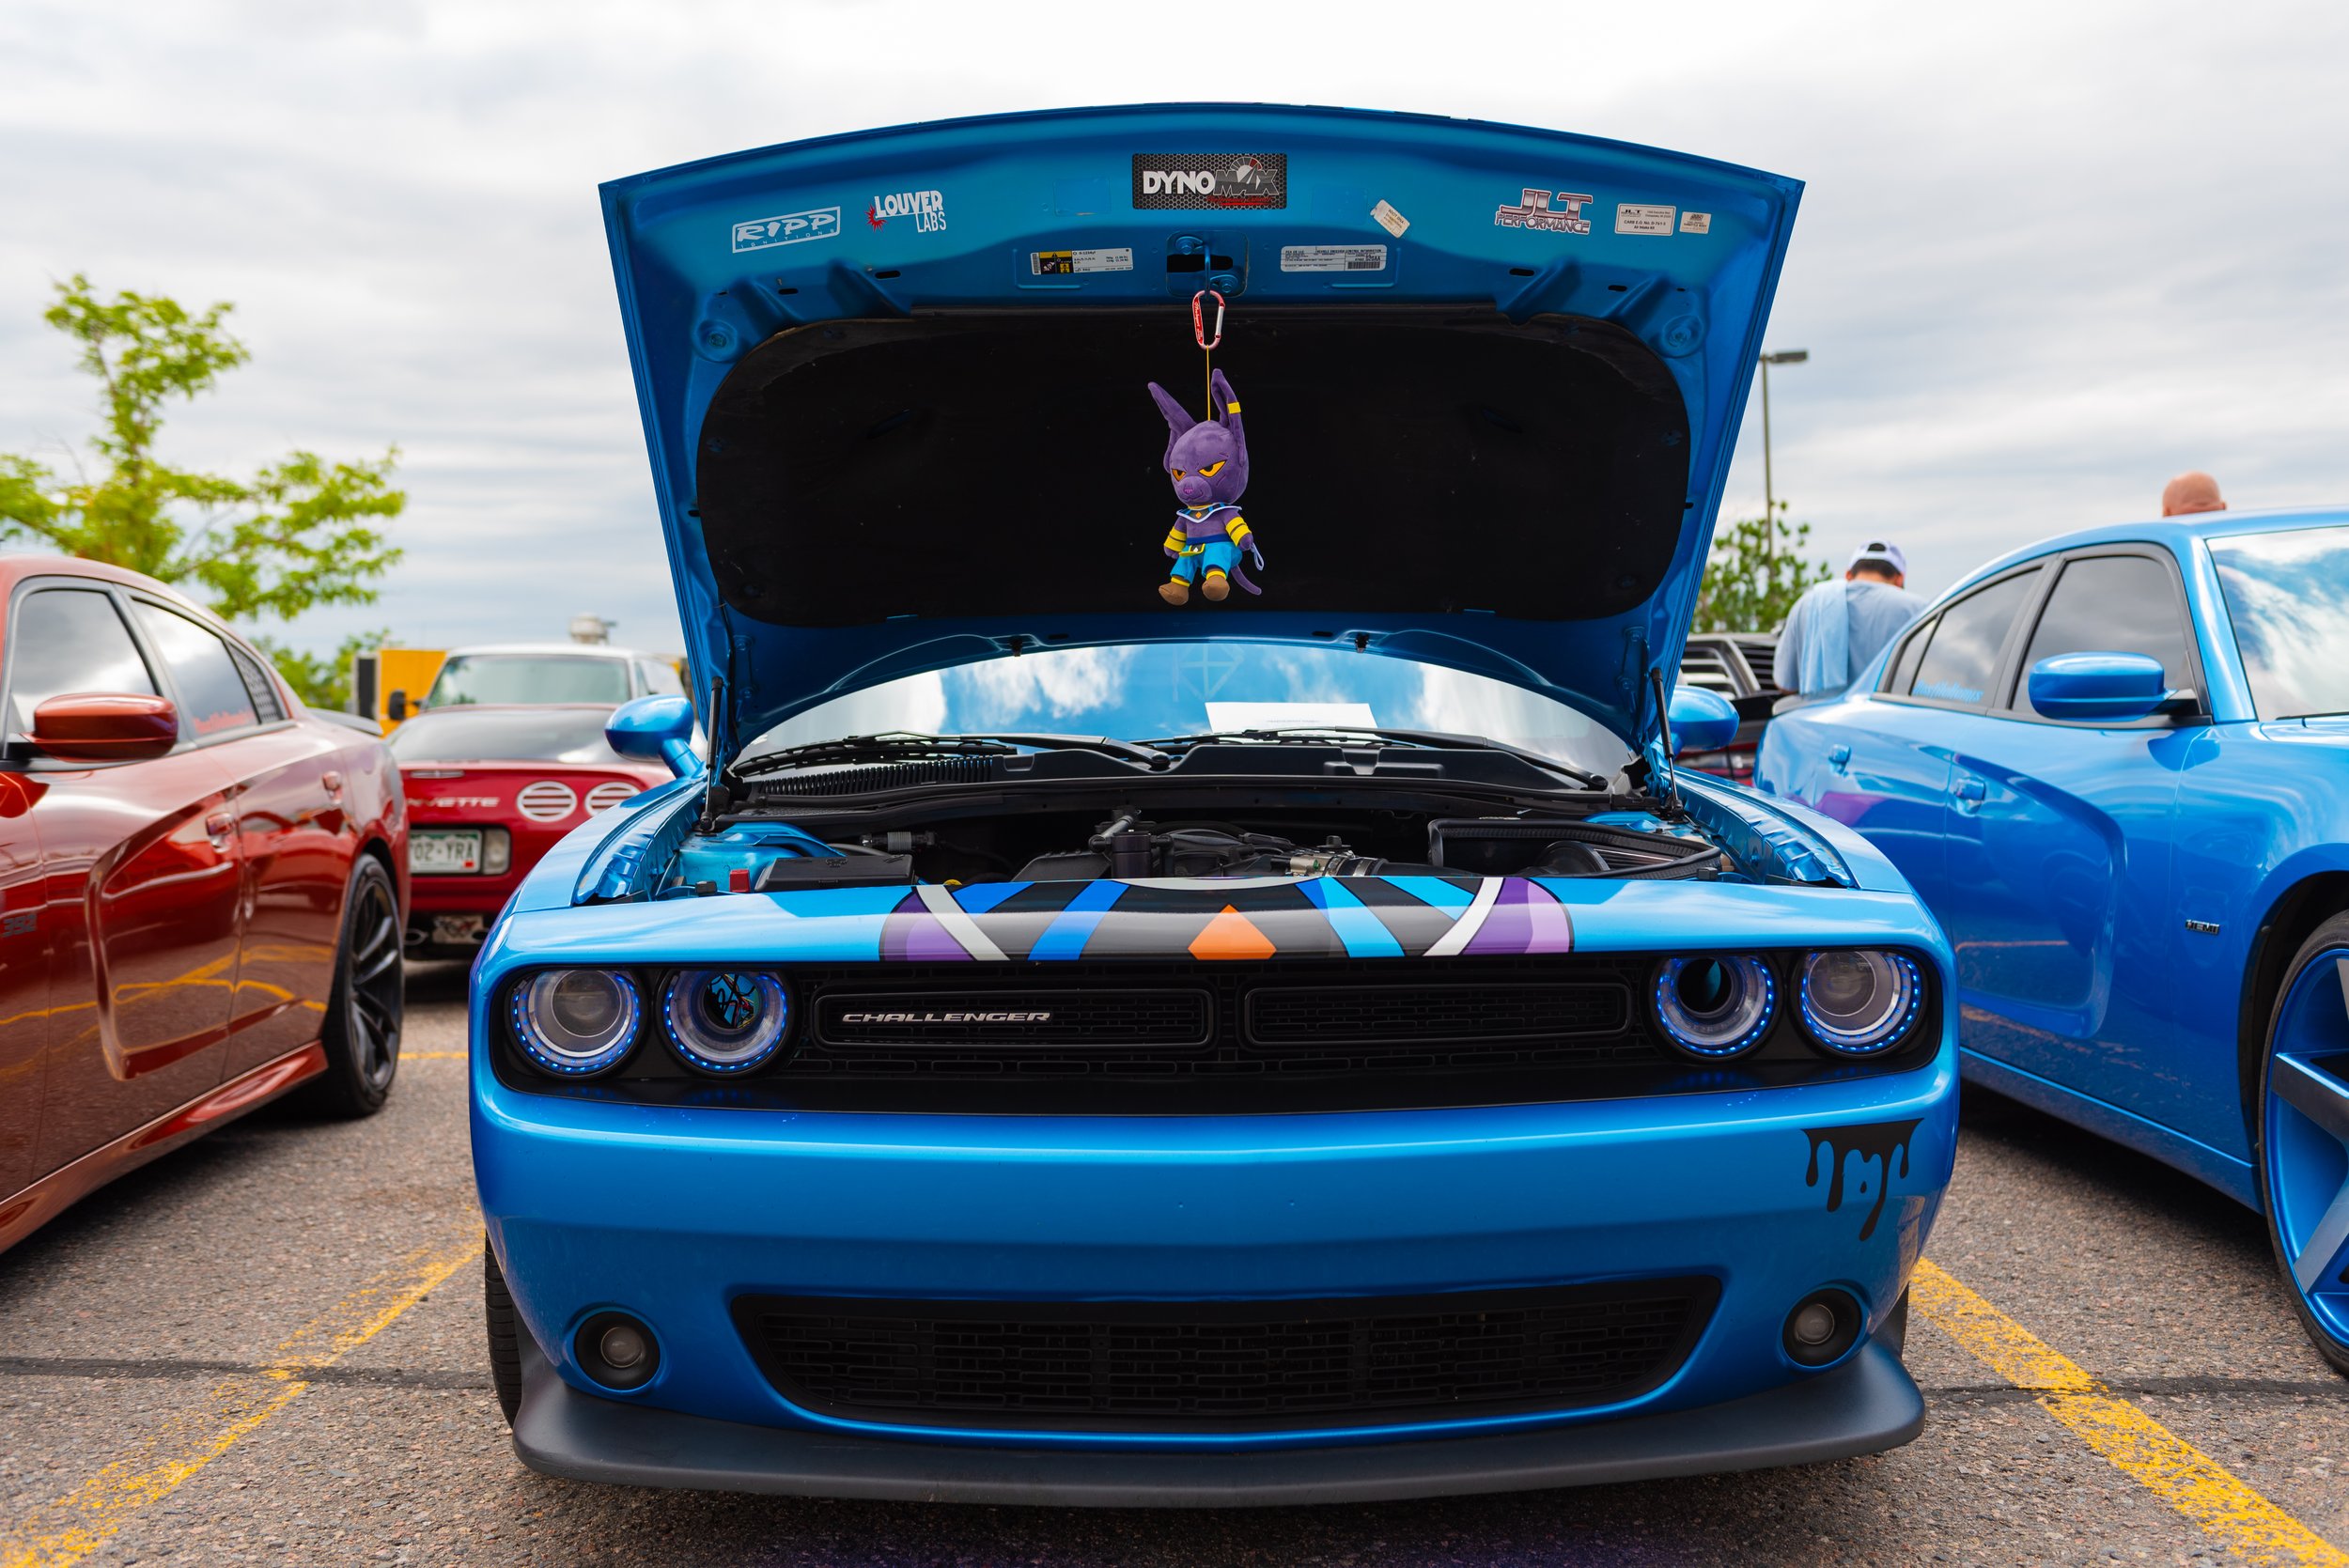  Photo: Adrian Michael  Dodge Charger with a Chibi Beerus from Dragon Ball Z doll hangs from the hood. 